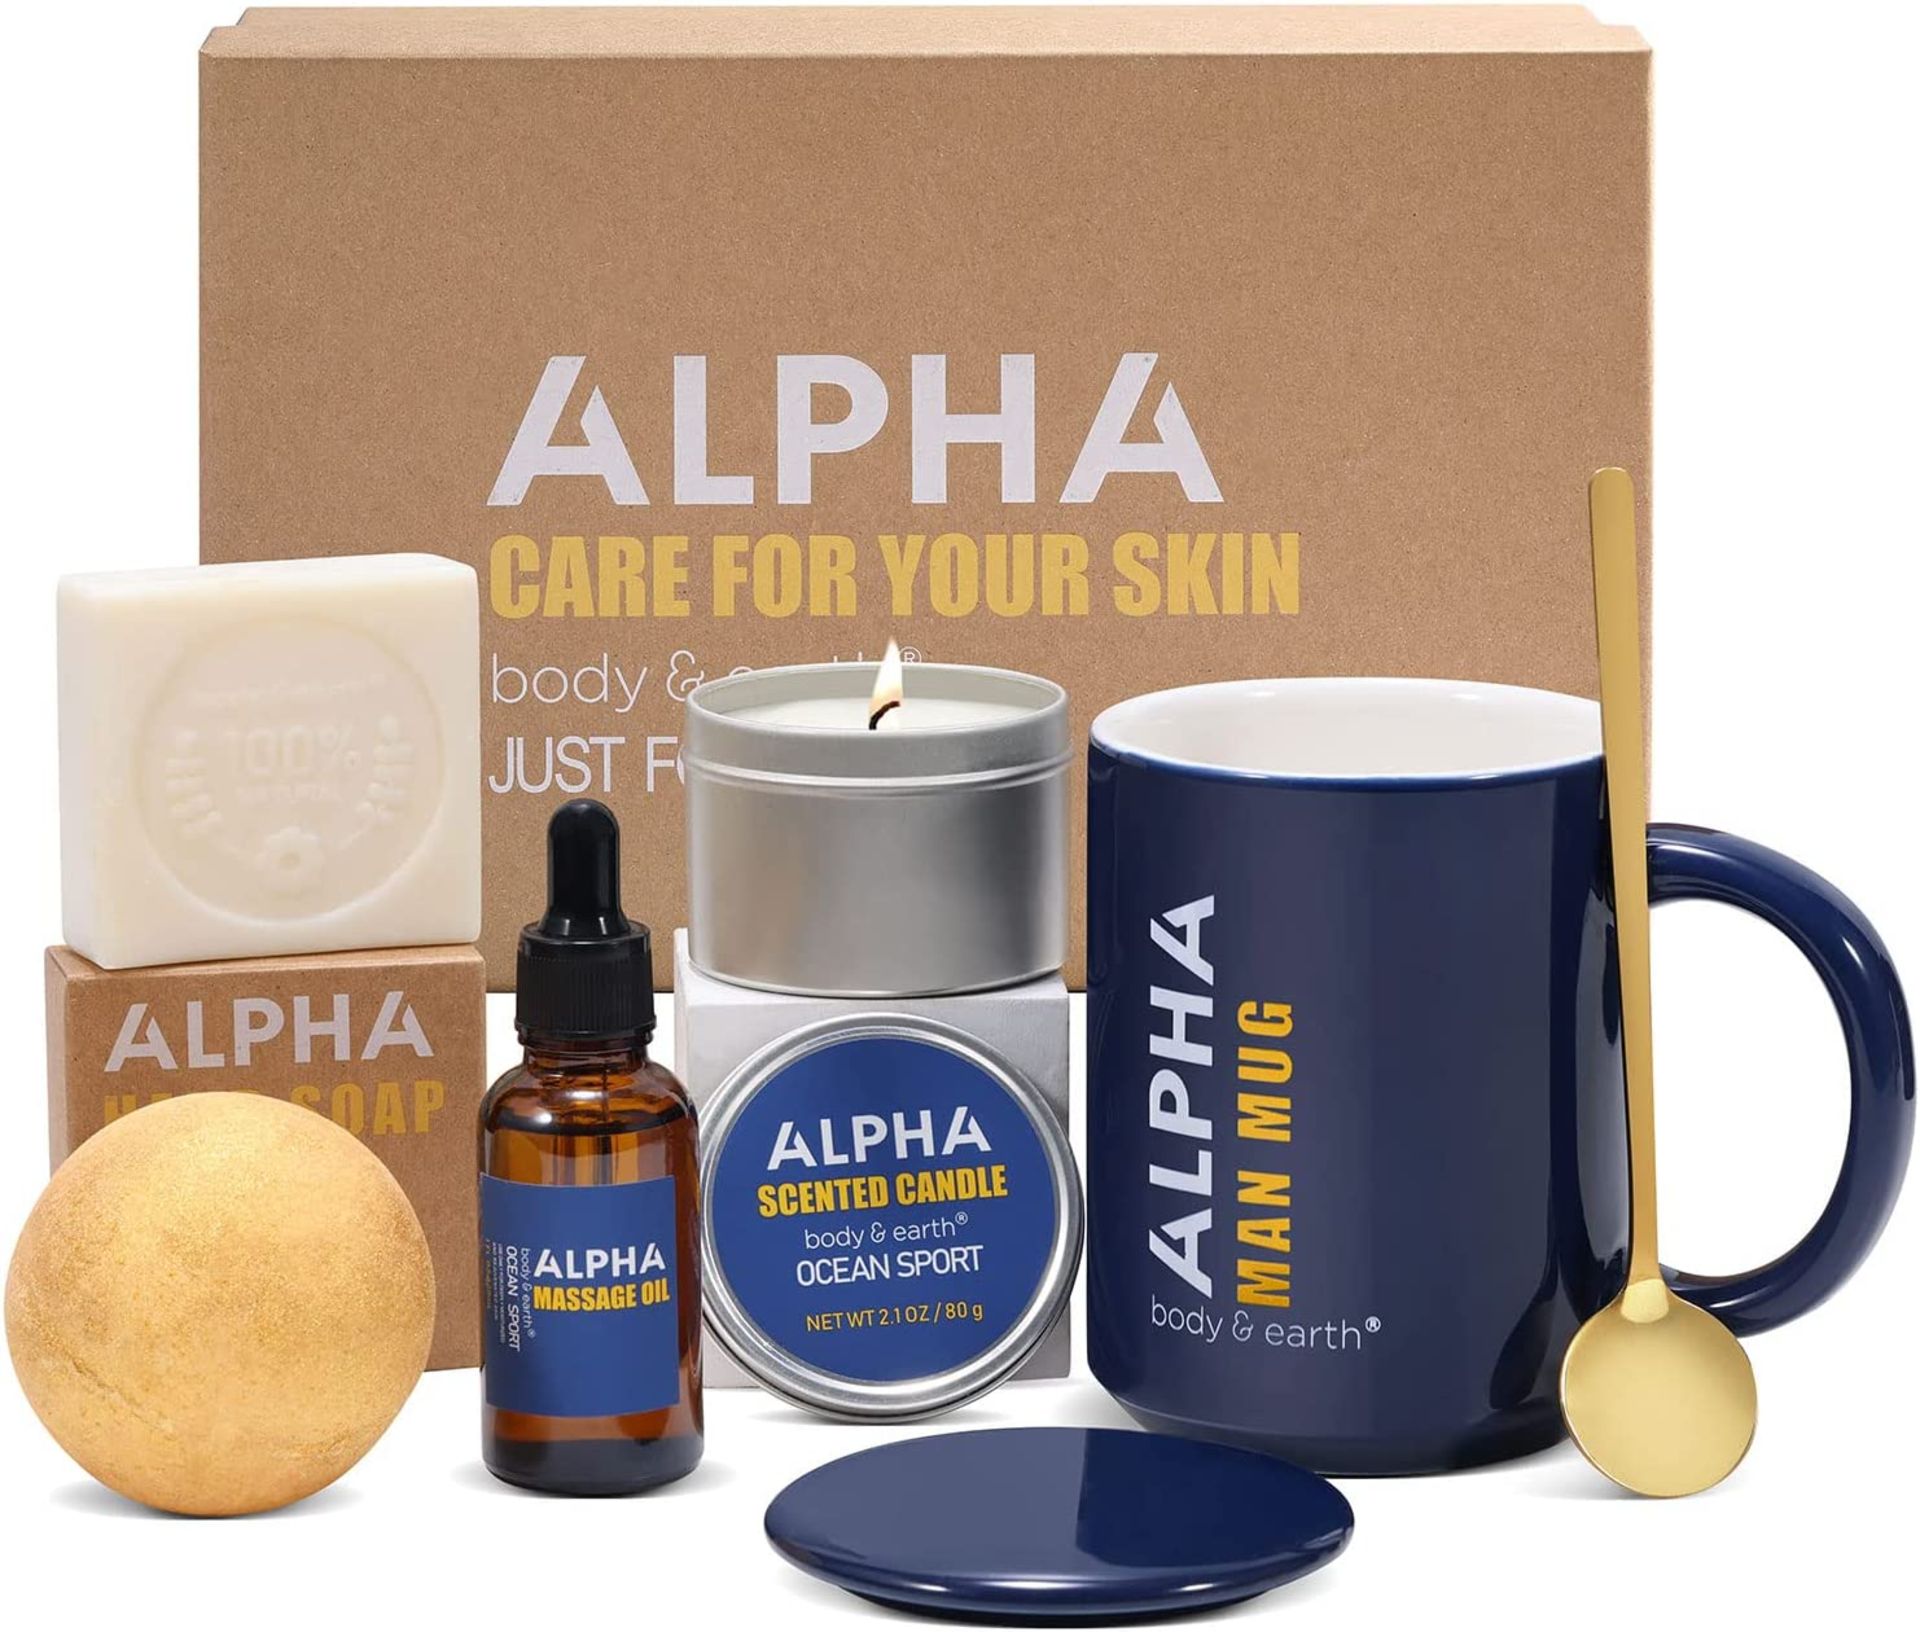 24 X NEW PACKAGED Alpha - Care For Your Skin - Body & Earth. Just For You 6 Piece Gift Sets (SKU: